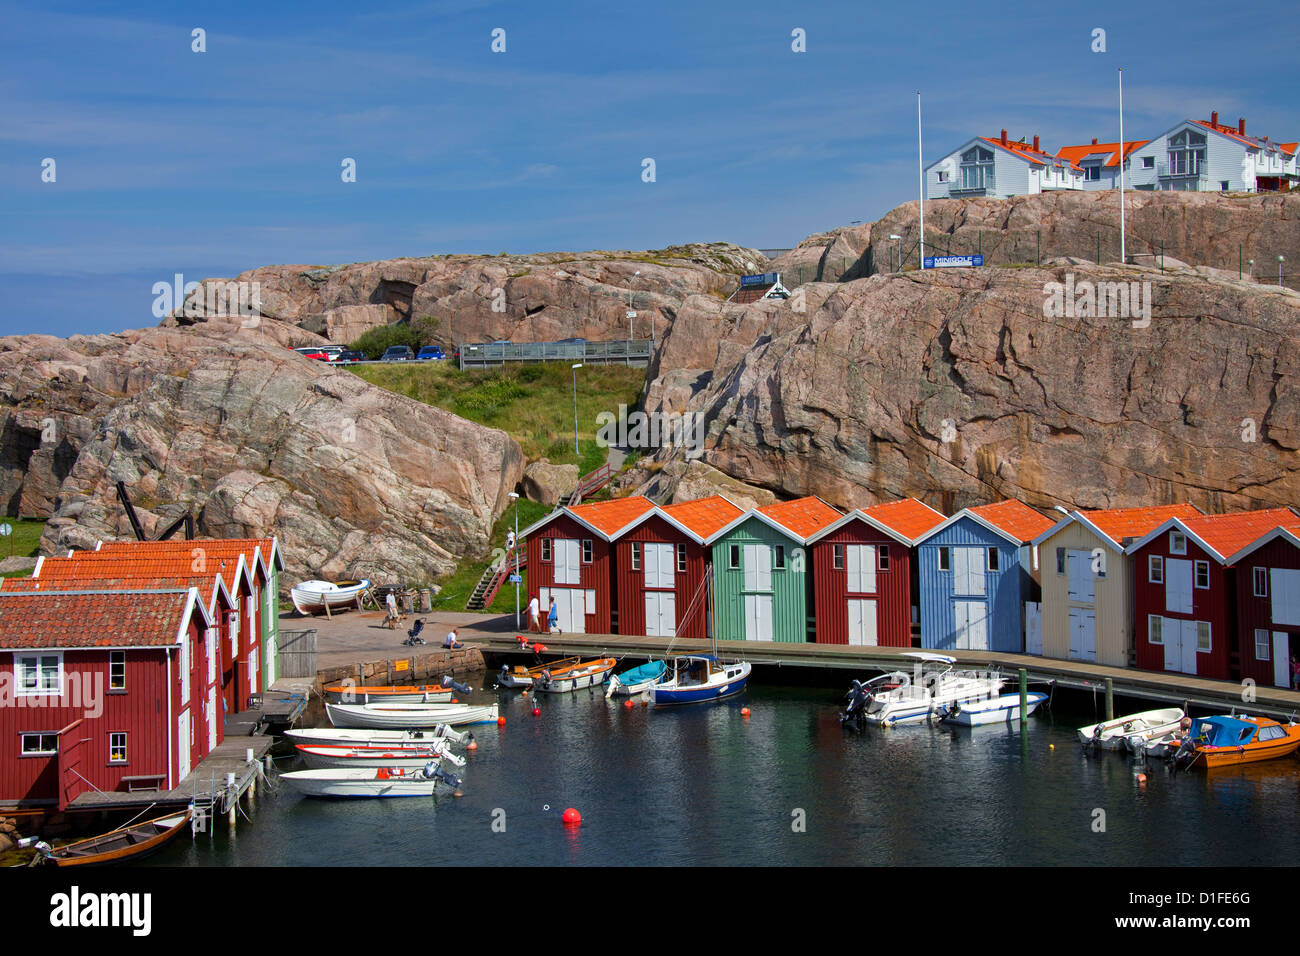 Colourful traditional fishing huts and boathouses with boats along wooden pier at Smögen, Bohuslän, Sweden, Scandinavia Stock Photo